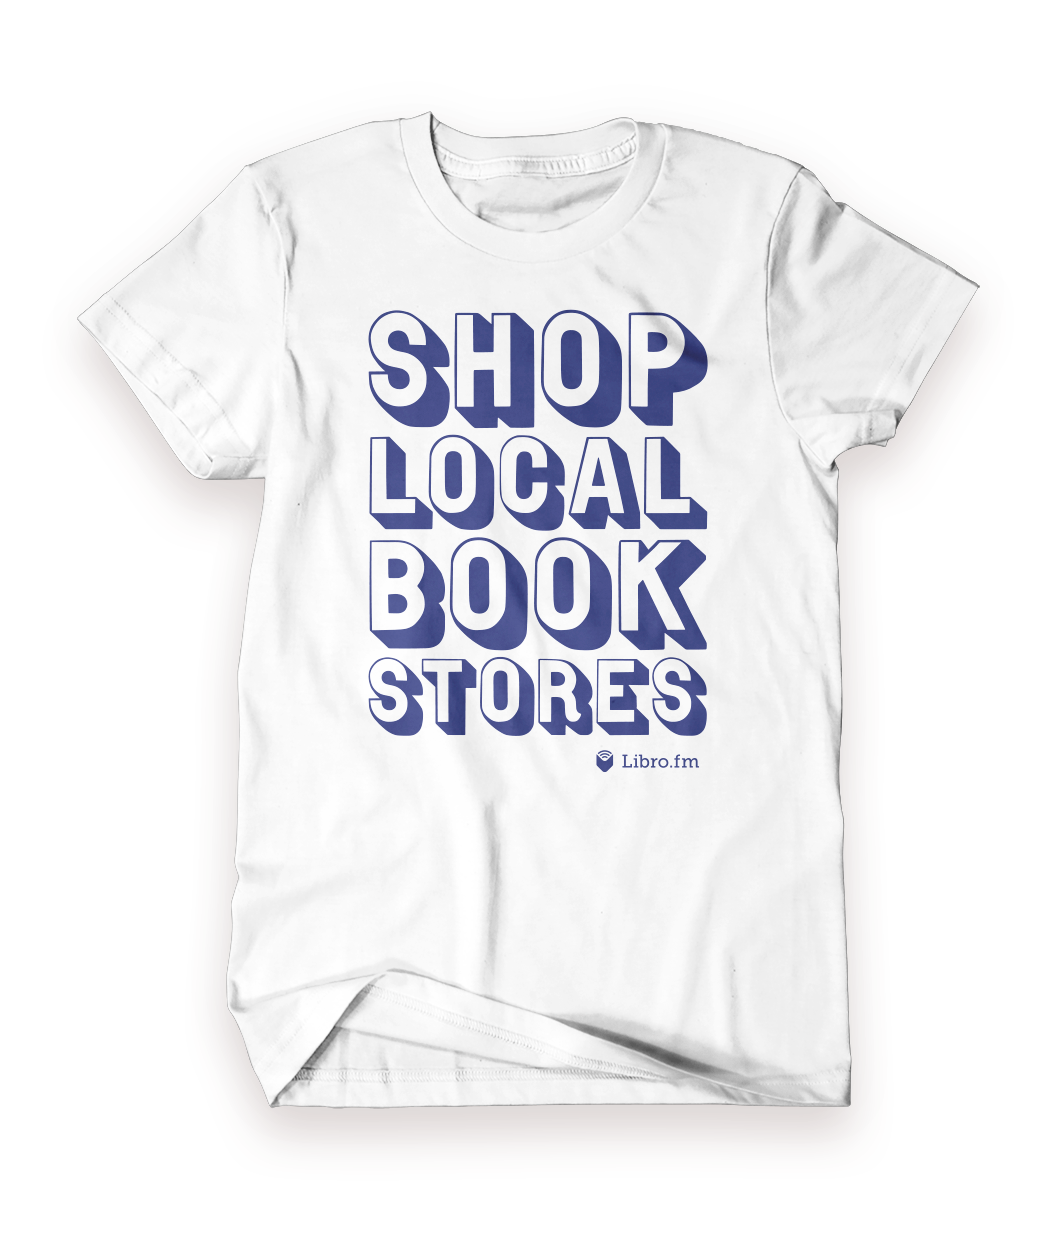 A white shirt with “Shop Local Book Stores” is in white sans serif font with a blue drop shadow. Below in the bottom right is a blue open book followed by “Libro.fm” in white serif font - from Libro.fm